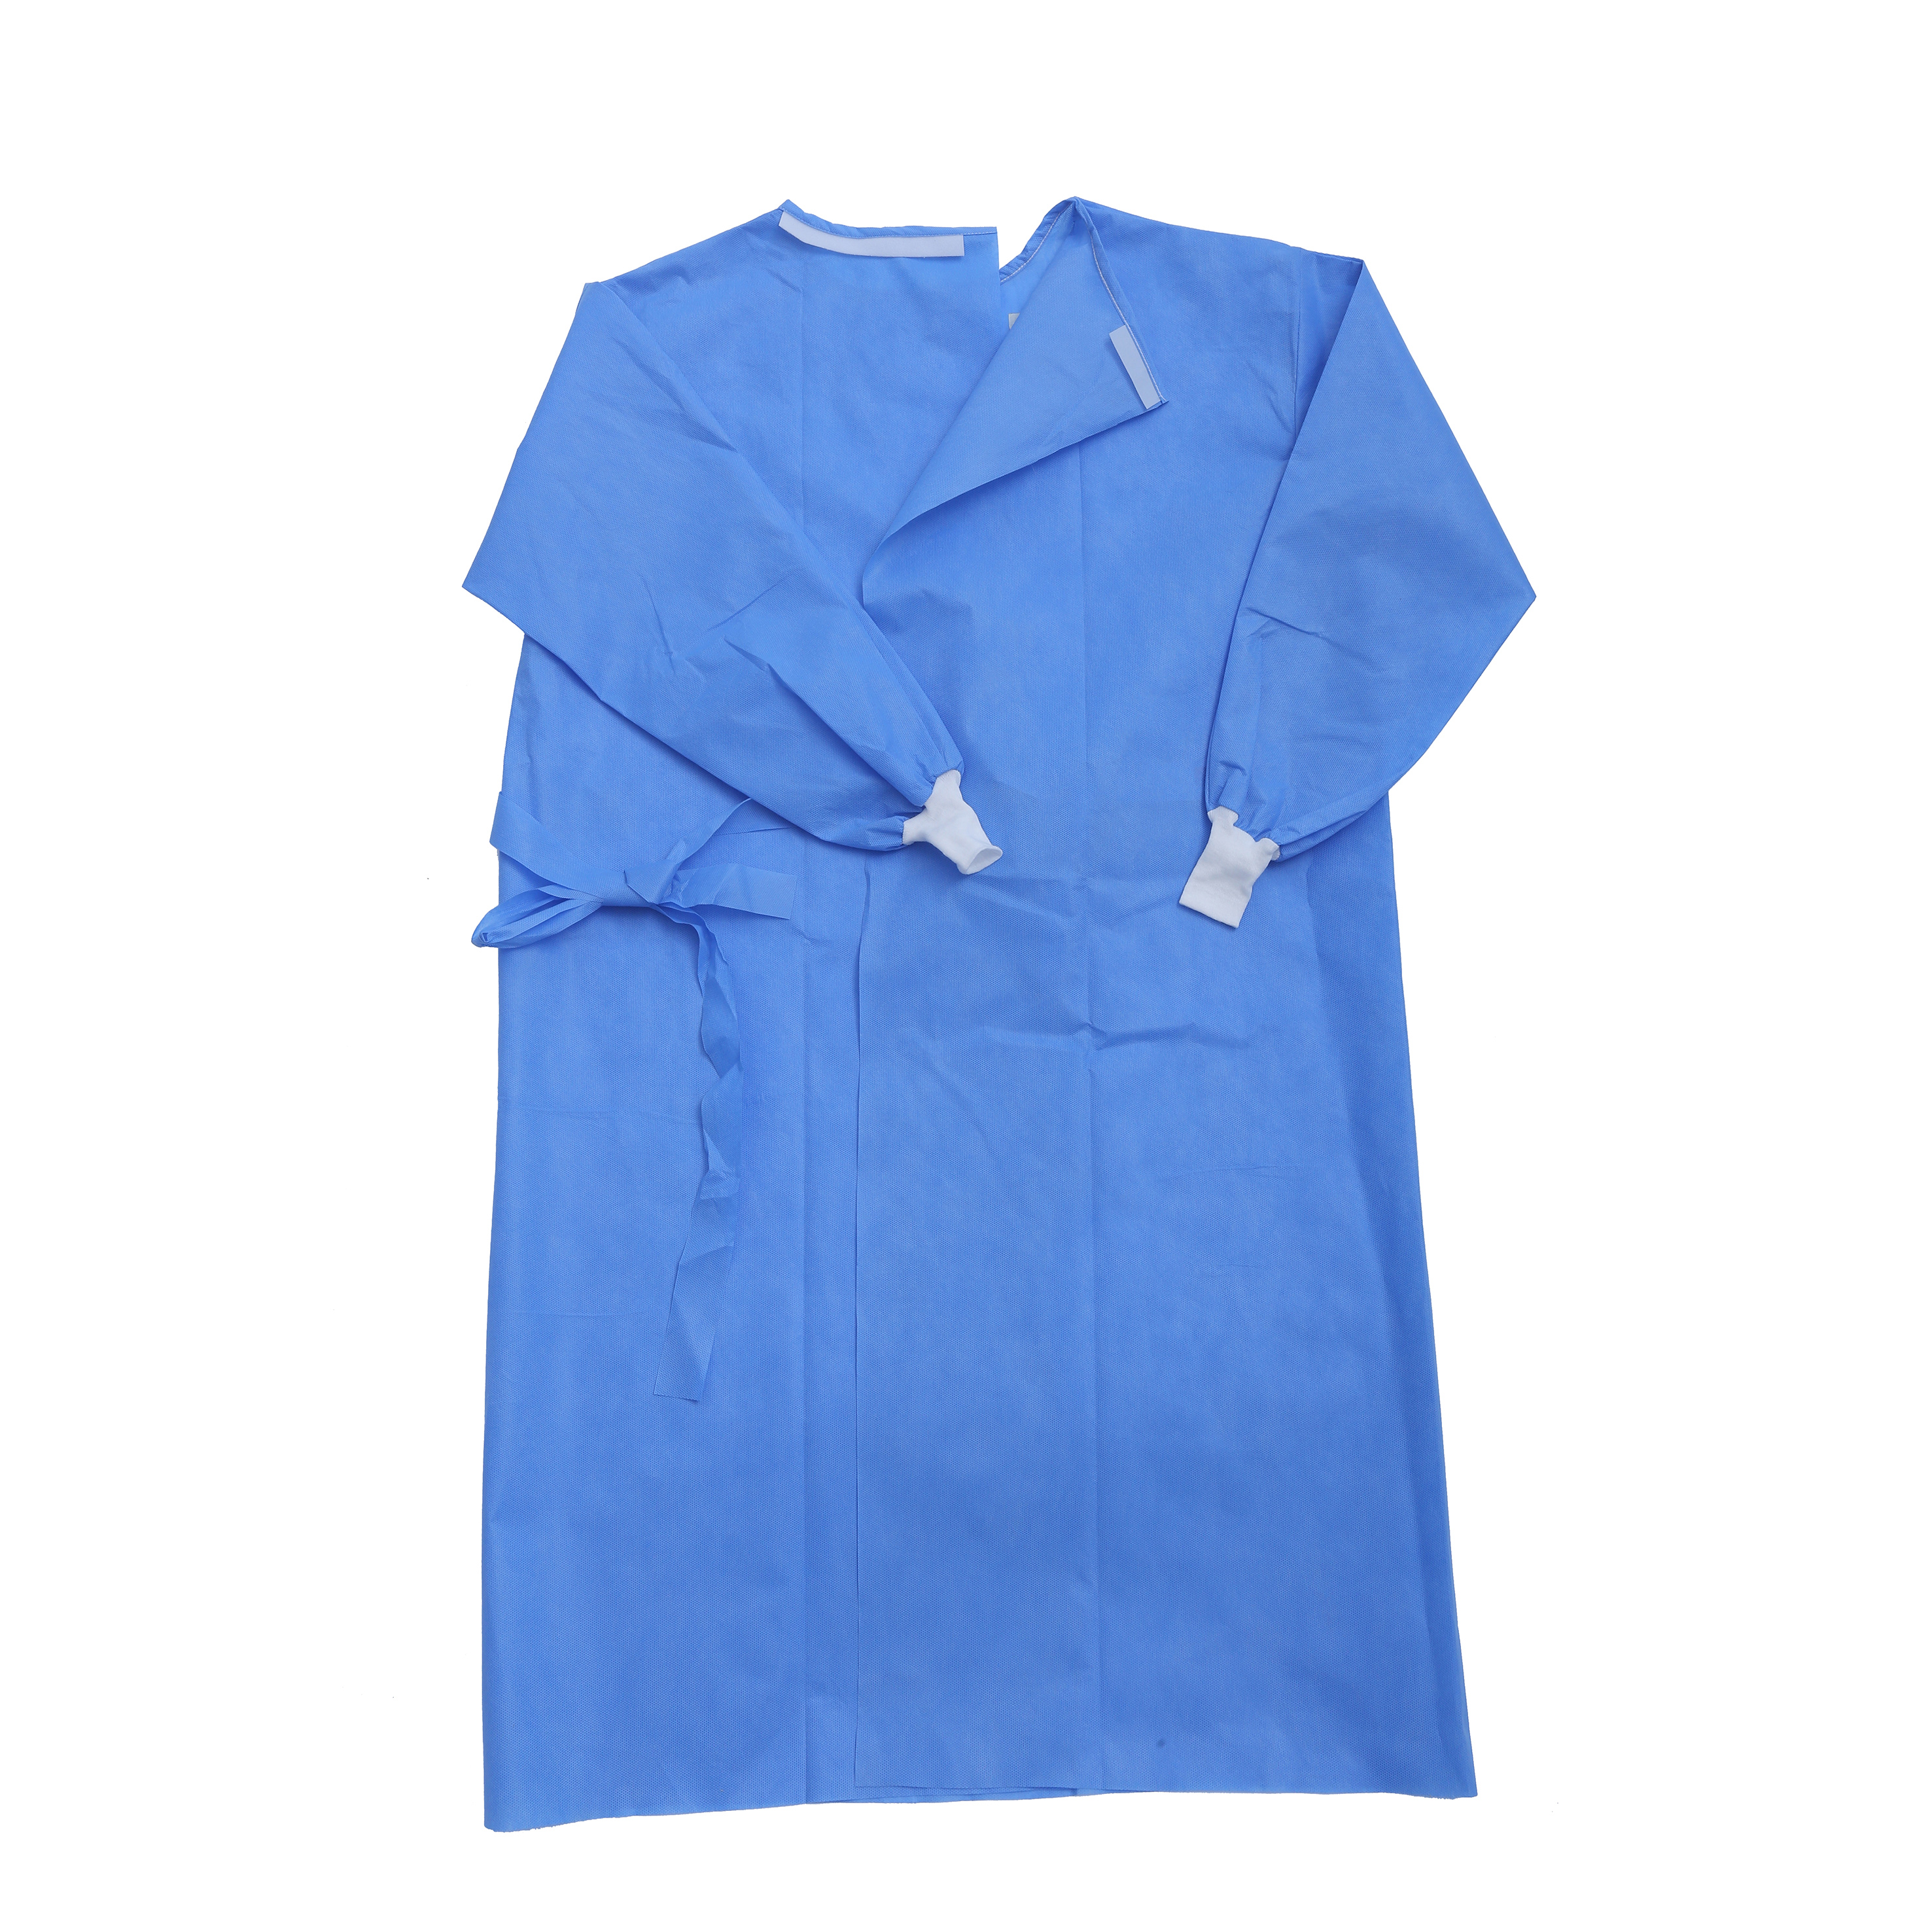 Quality Inspection for China Lighting Wholesale Market - Hot Selling Disposable Isolation Gown Medical SMS Disposable Surgical Gown for Hospital – Sellers Union